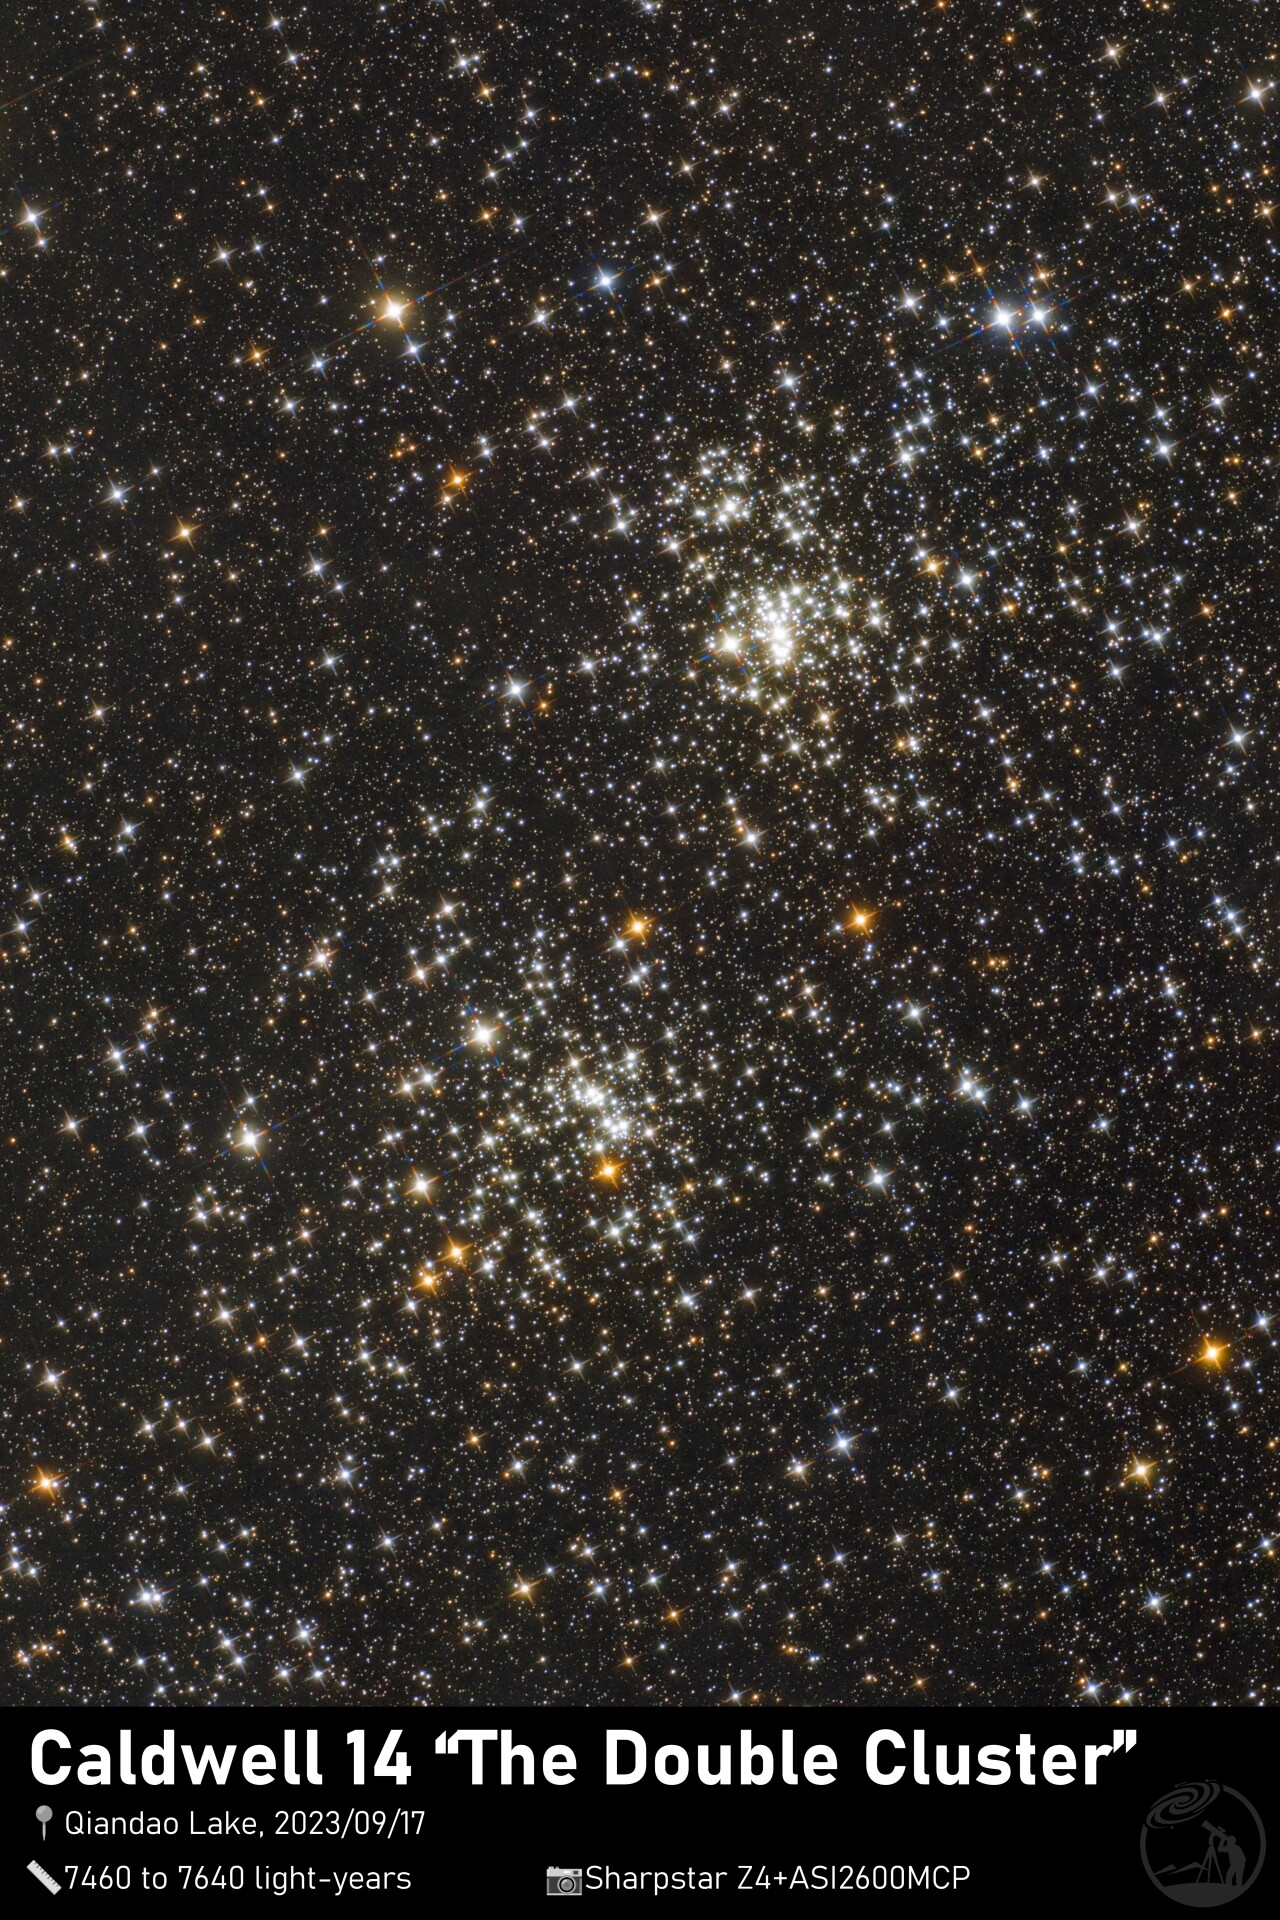 “The Double Cluster”